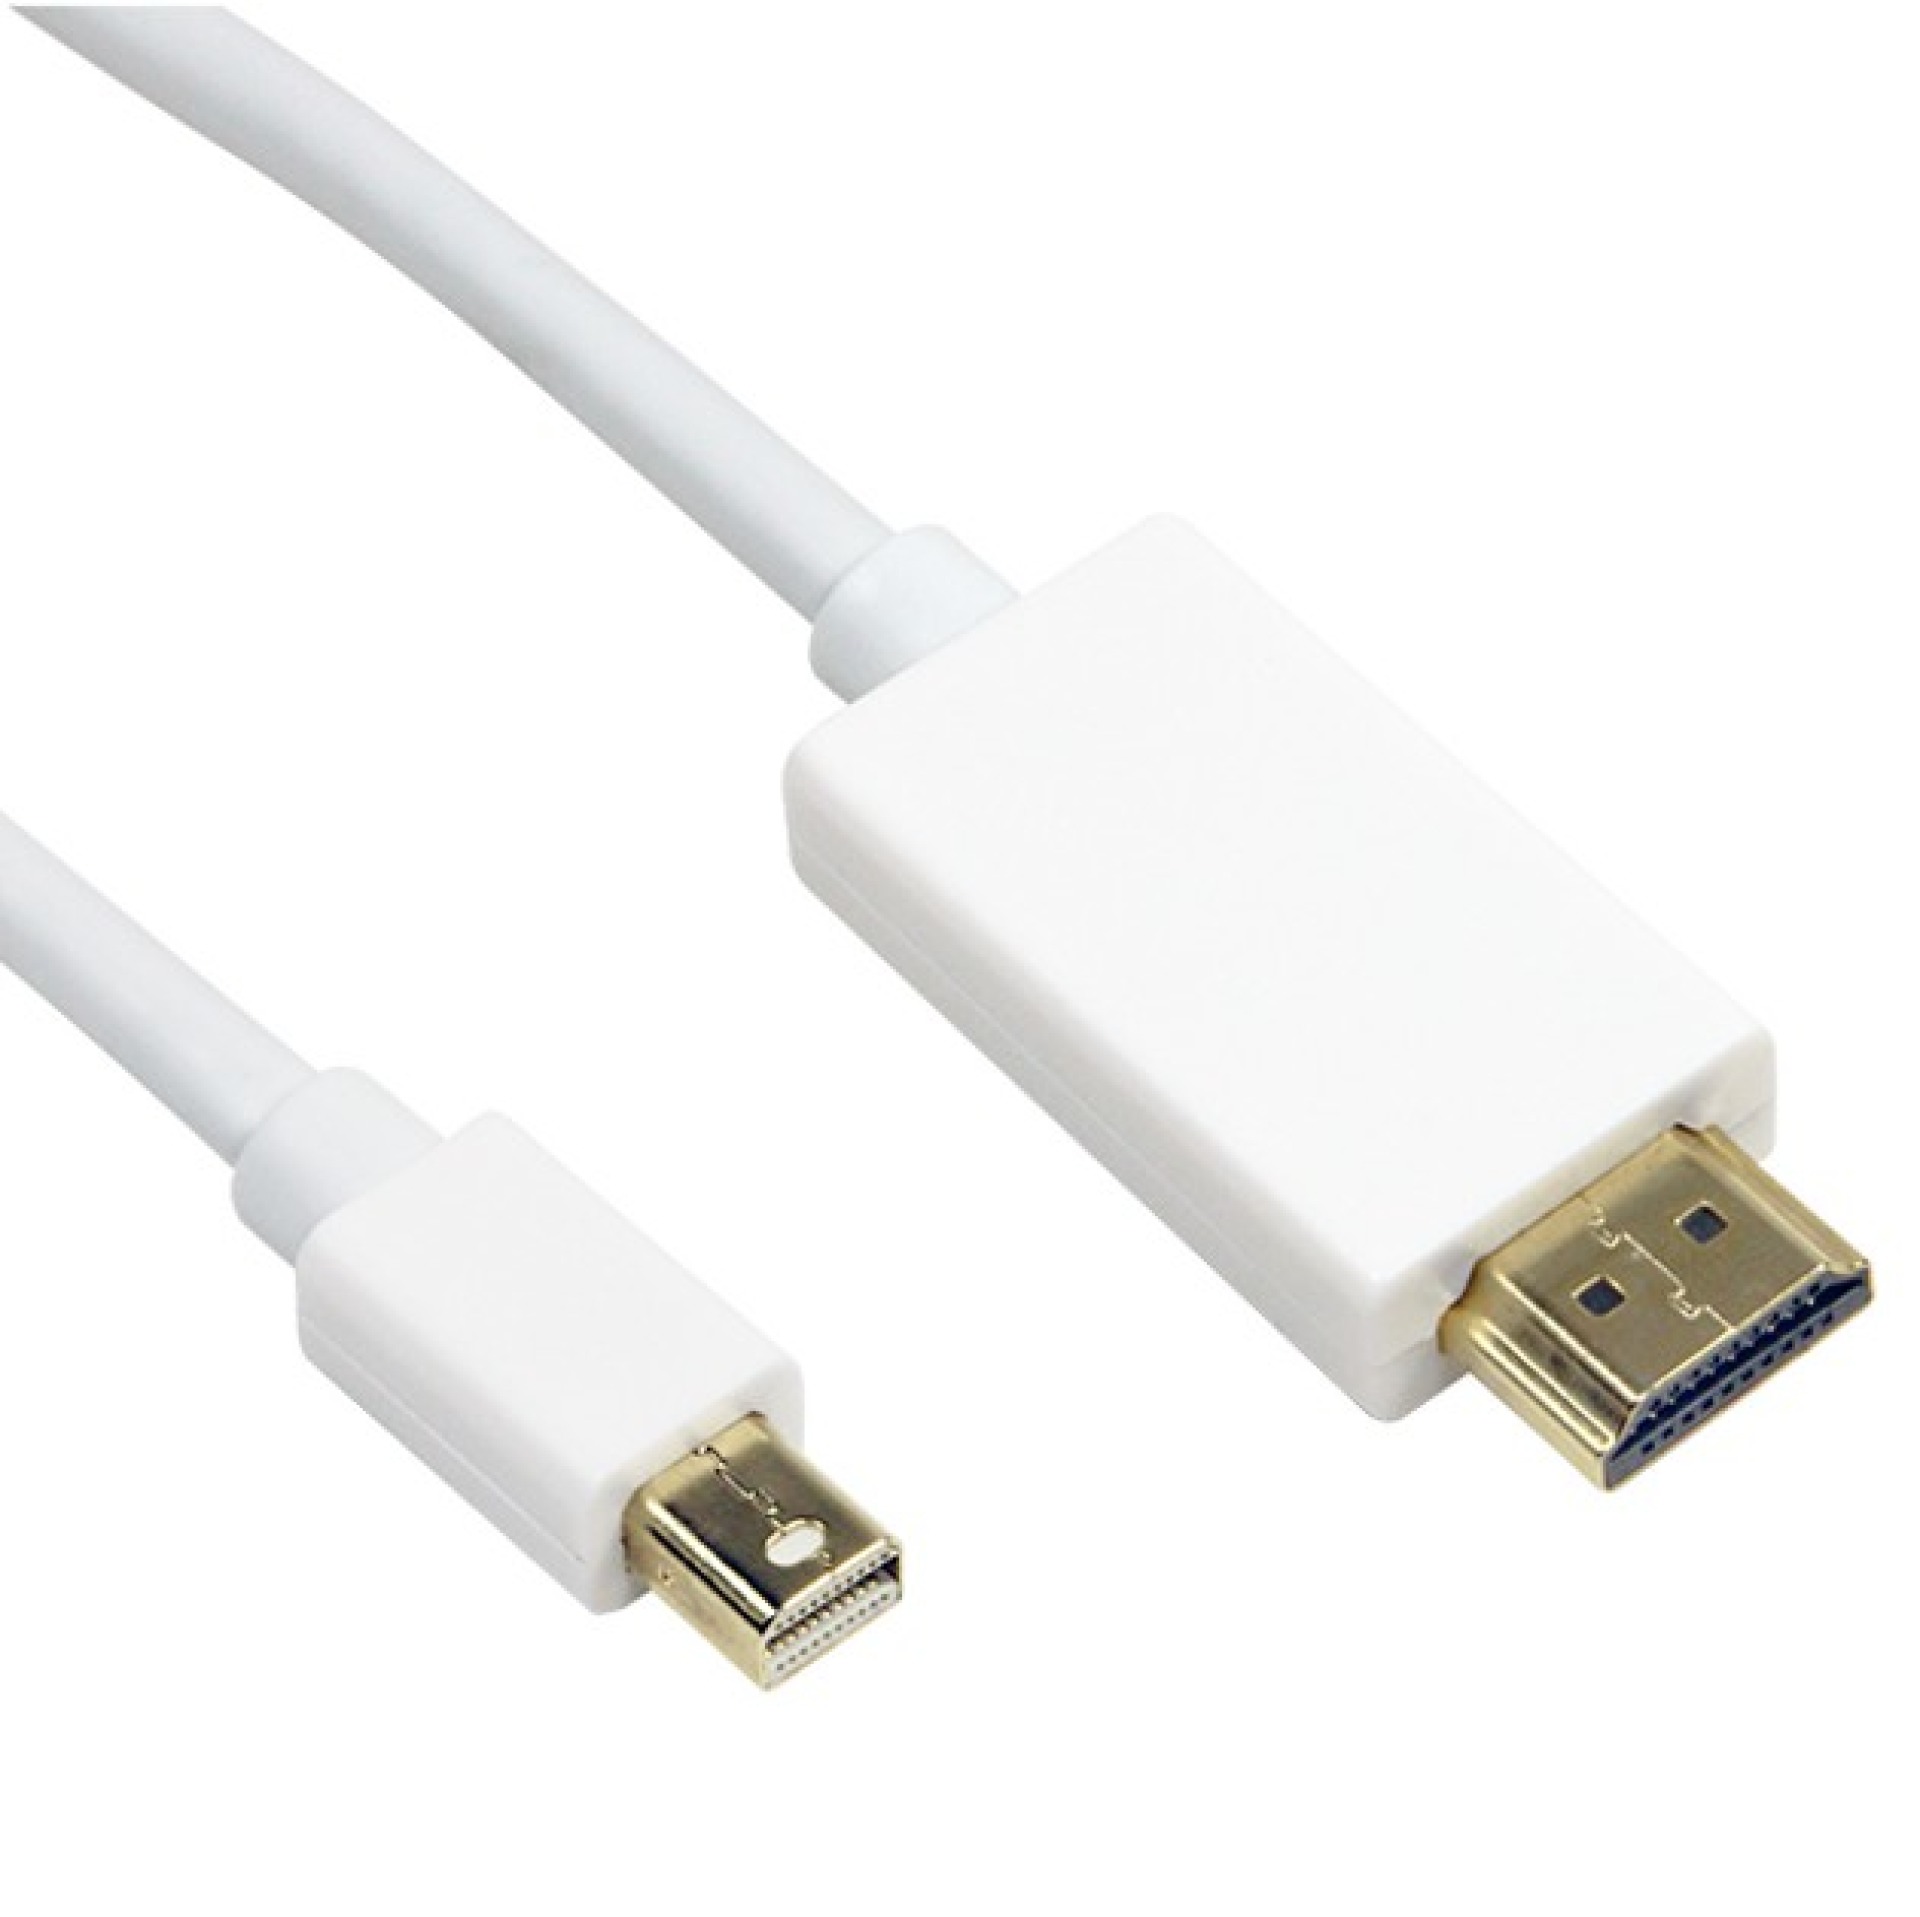 Mini-DisplayPort (Thunderbolt) Connection Cable to HDMI, M-M, white, 2m